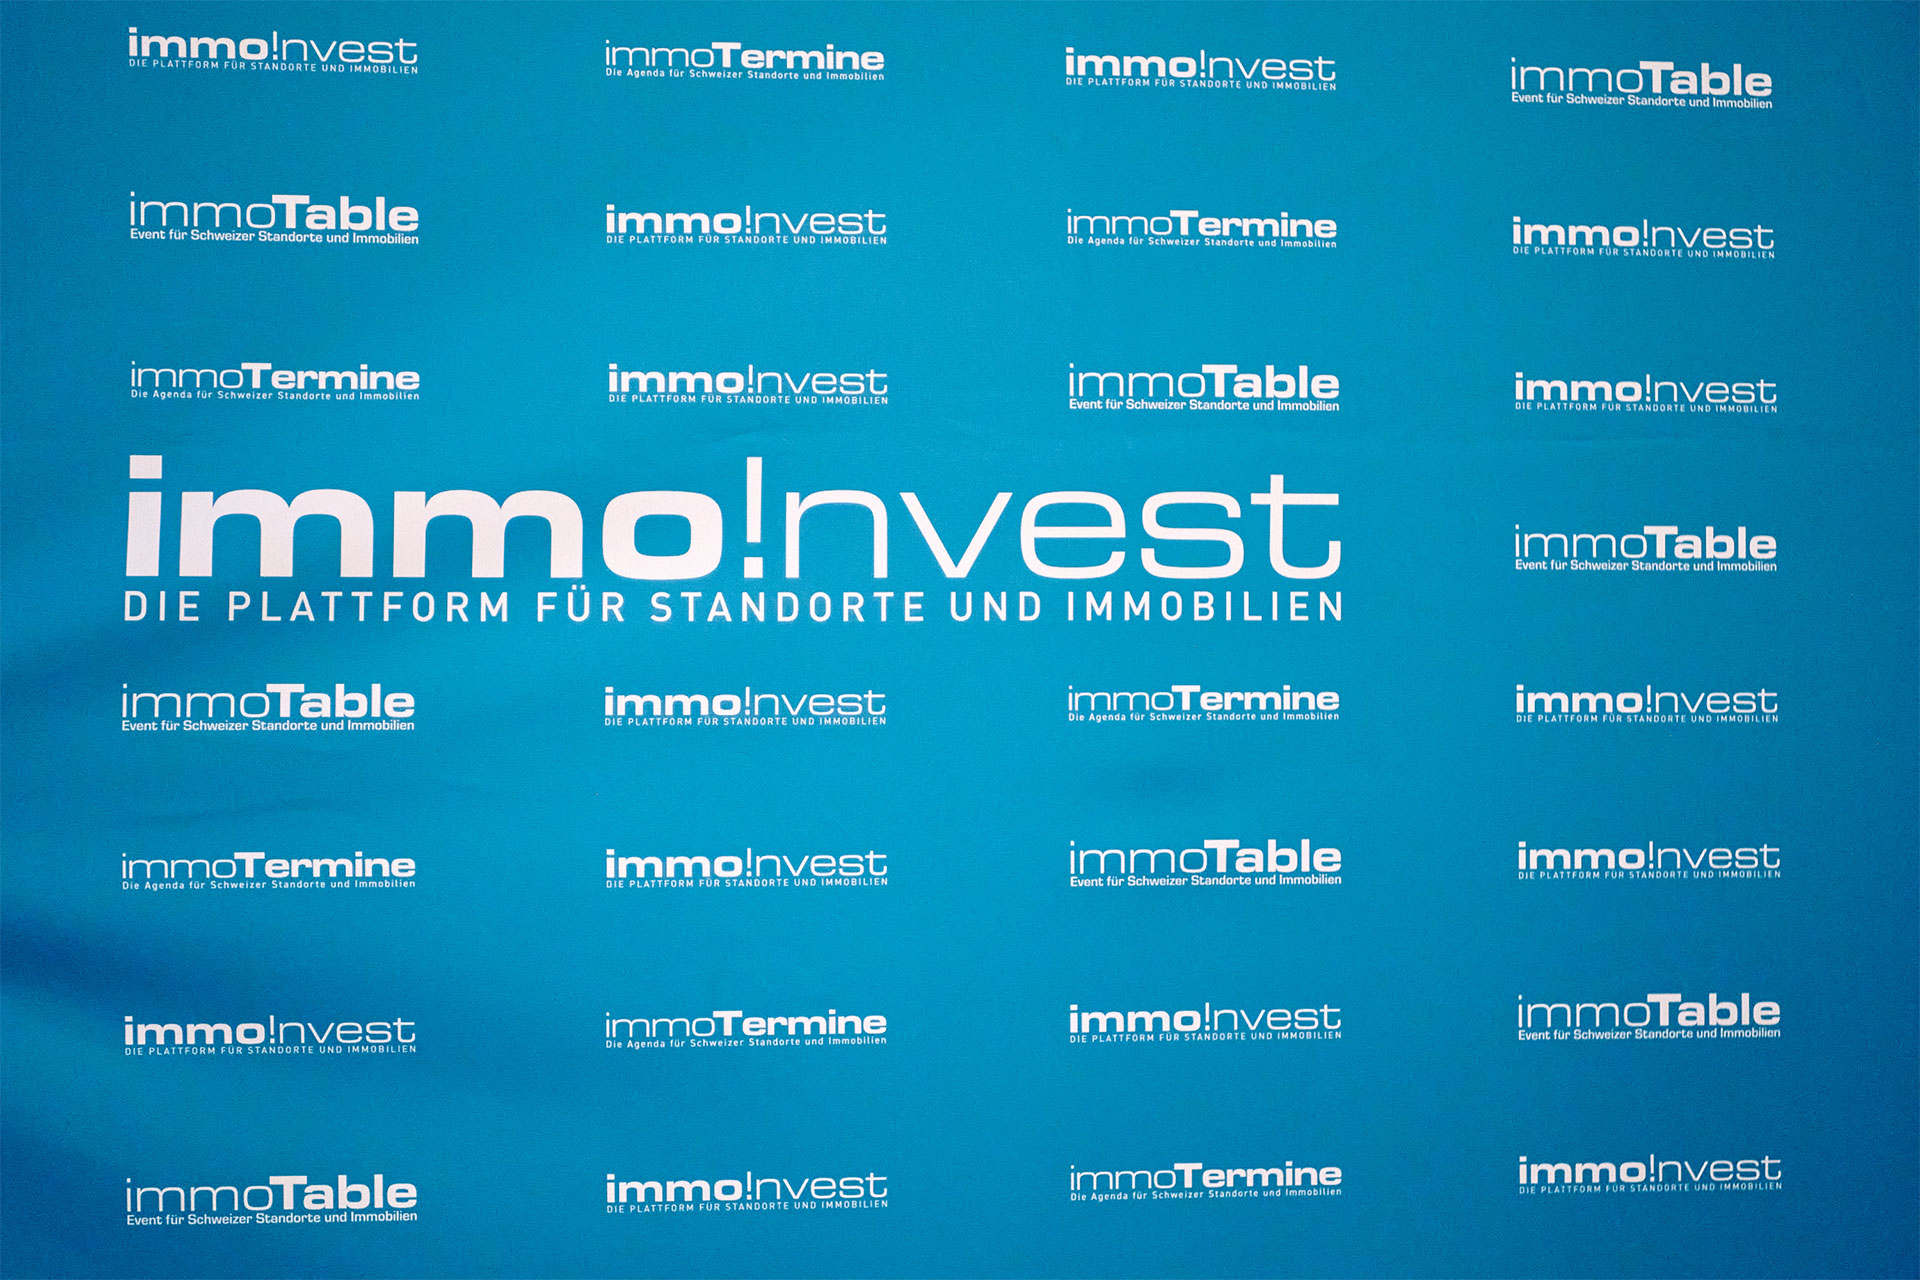 95. immoTable Basel Immobilien Networking Event